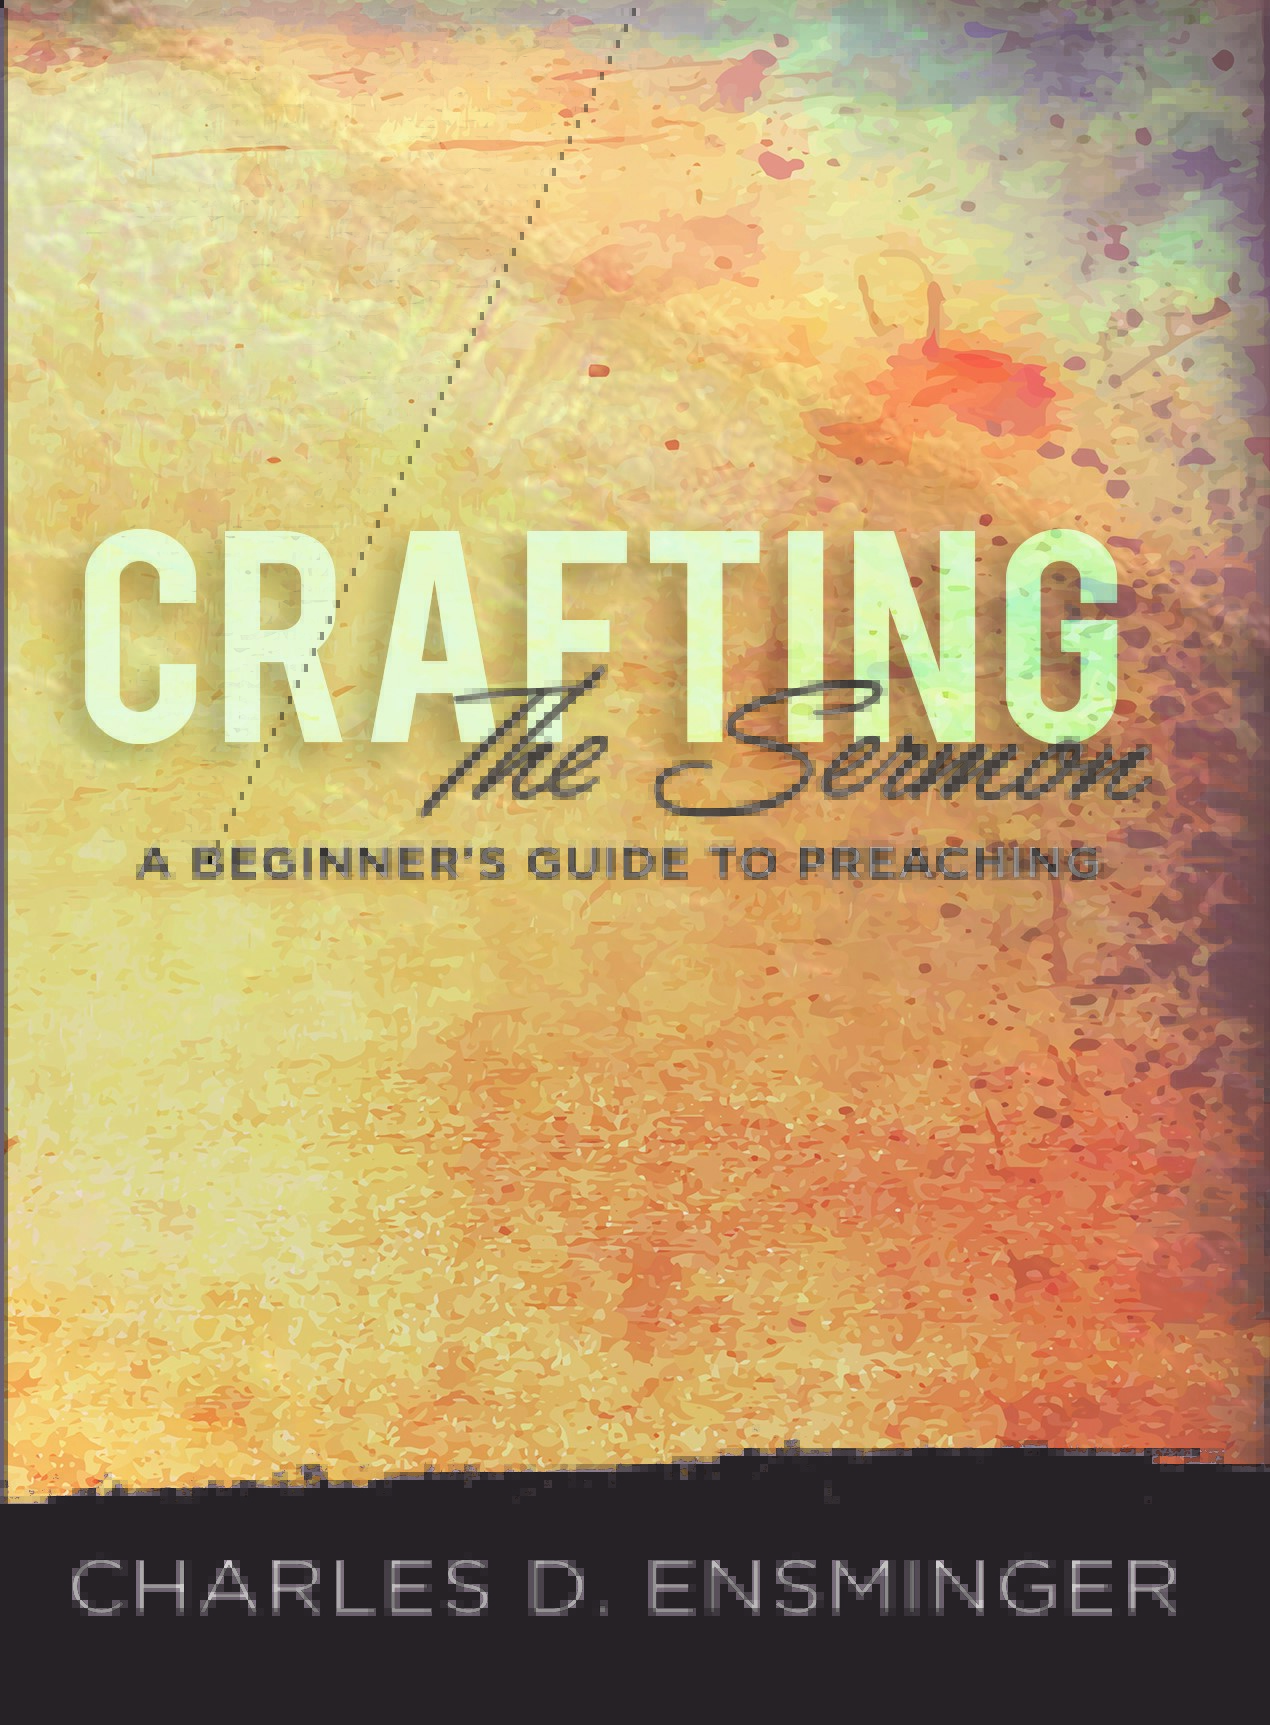 Crafting the Sermon: A Beginner’s Guide to Preaching